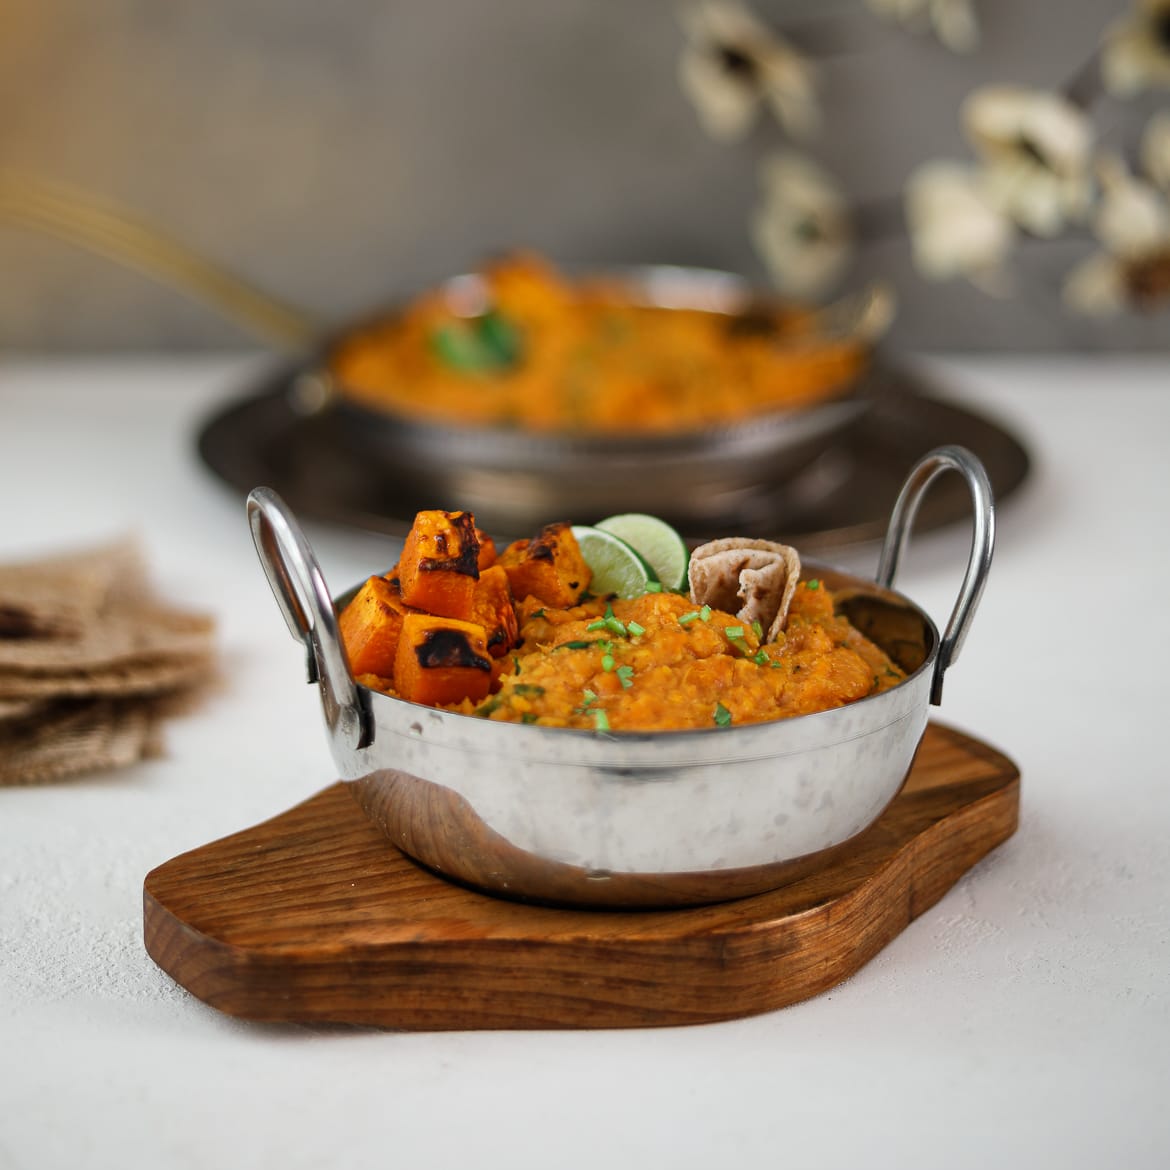 Two bowls of yellow daal topped with squash and limes wedges placed on trays